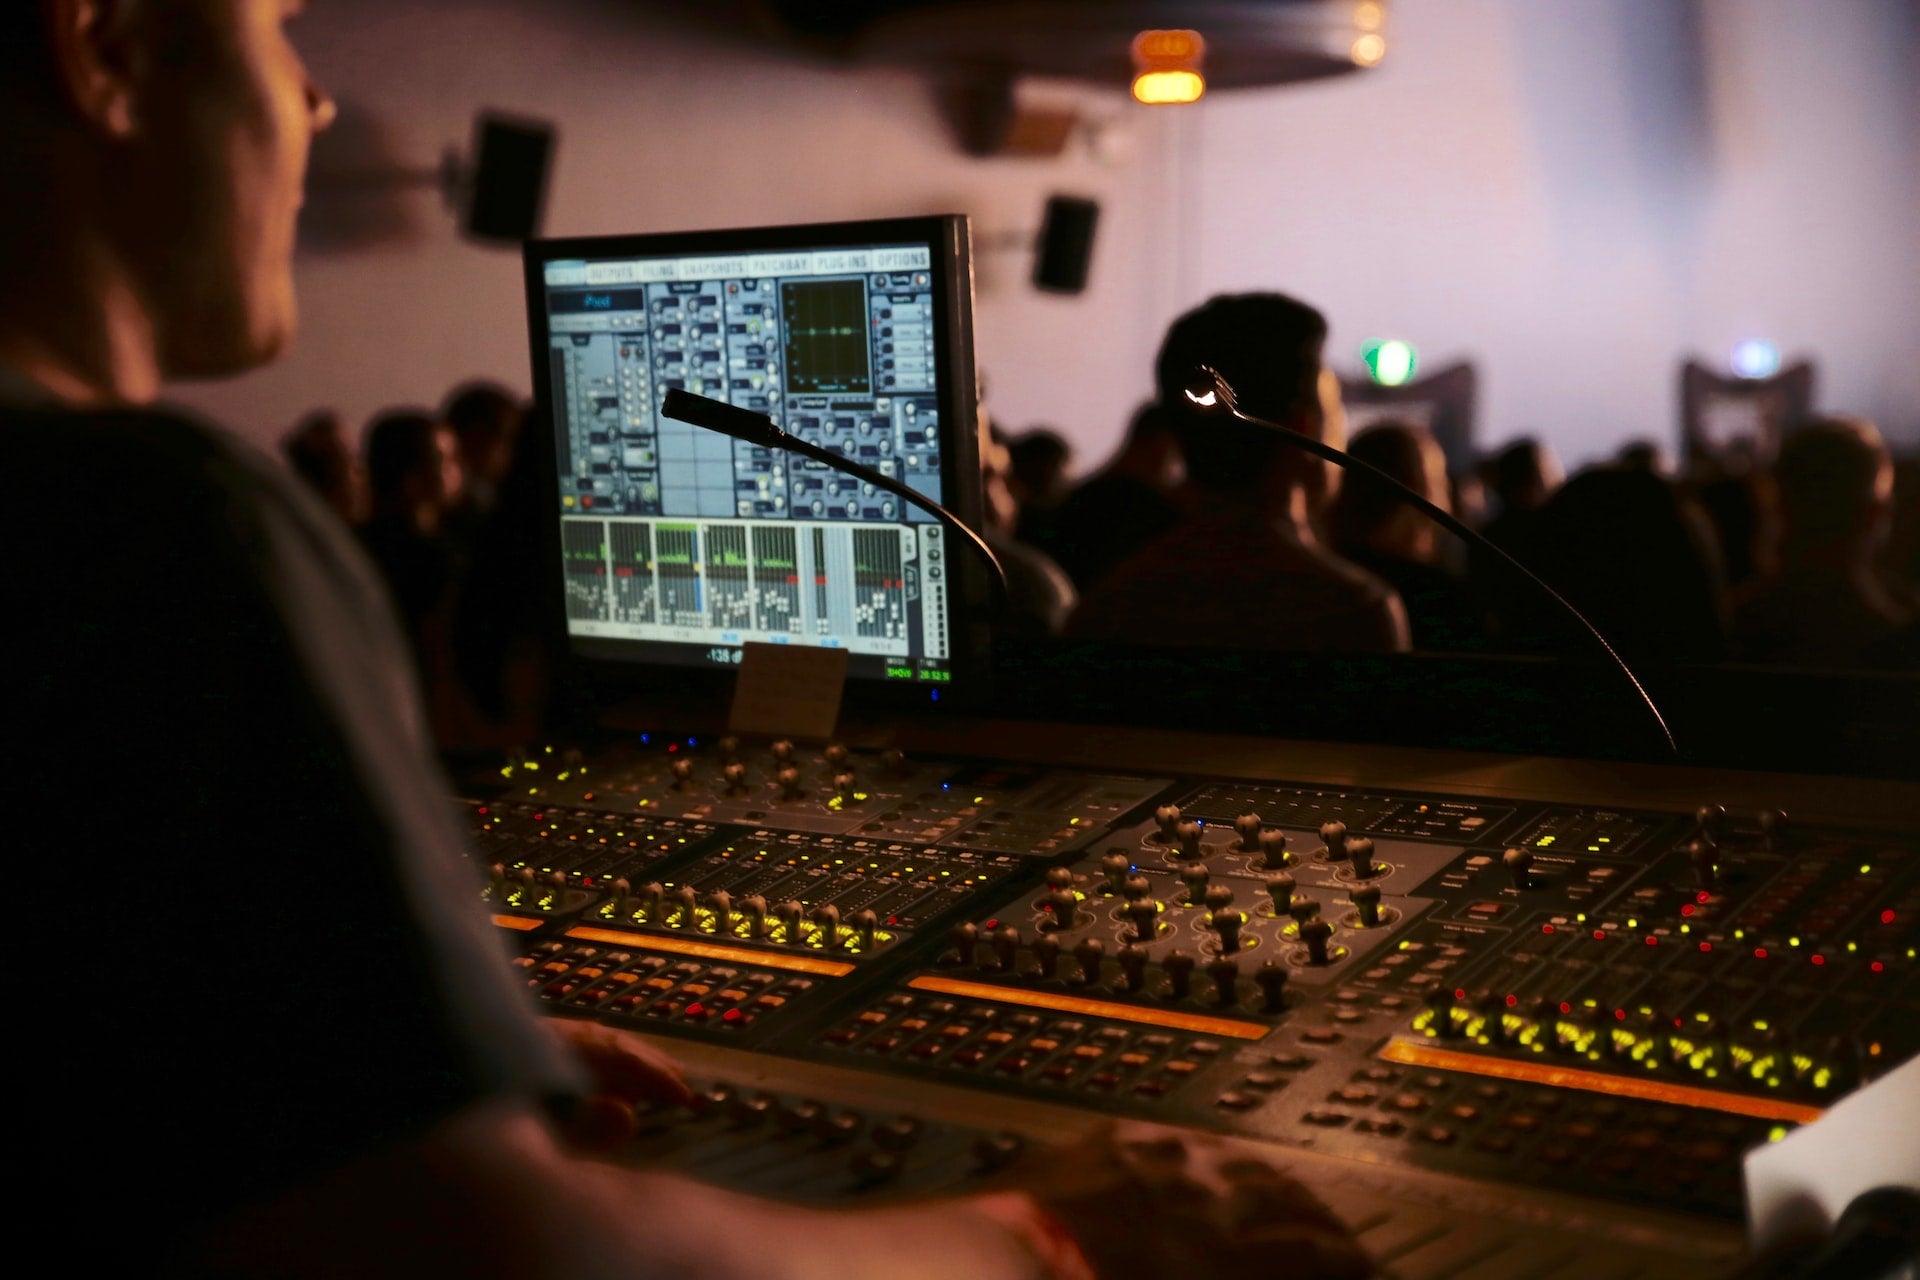 Maximize Your Earnings as a Sound Engineer